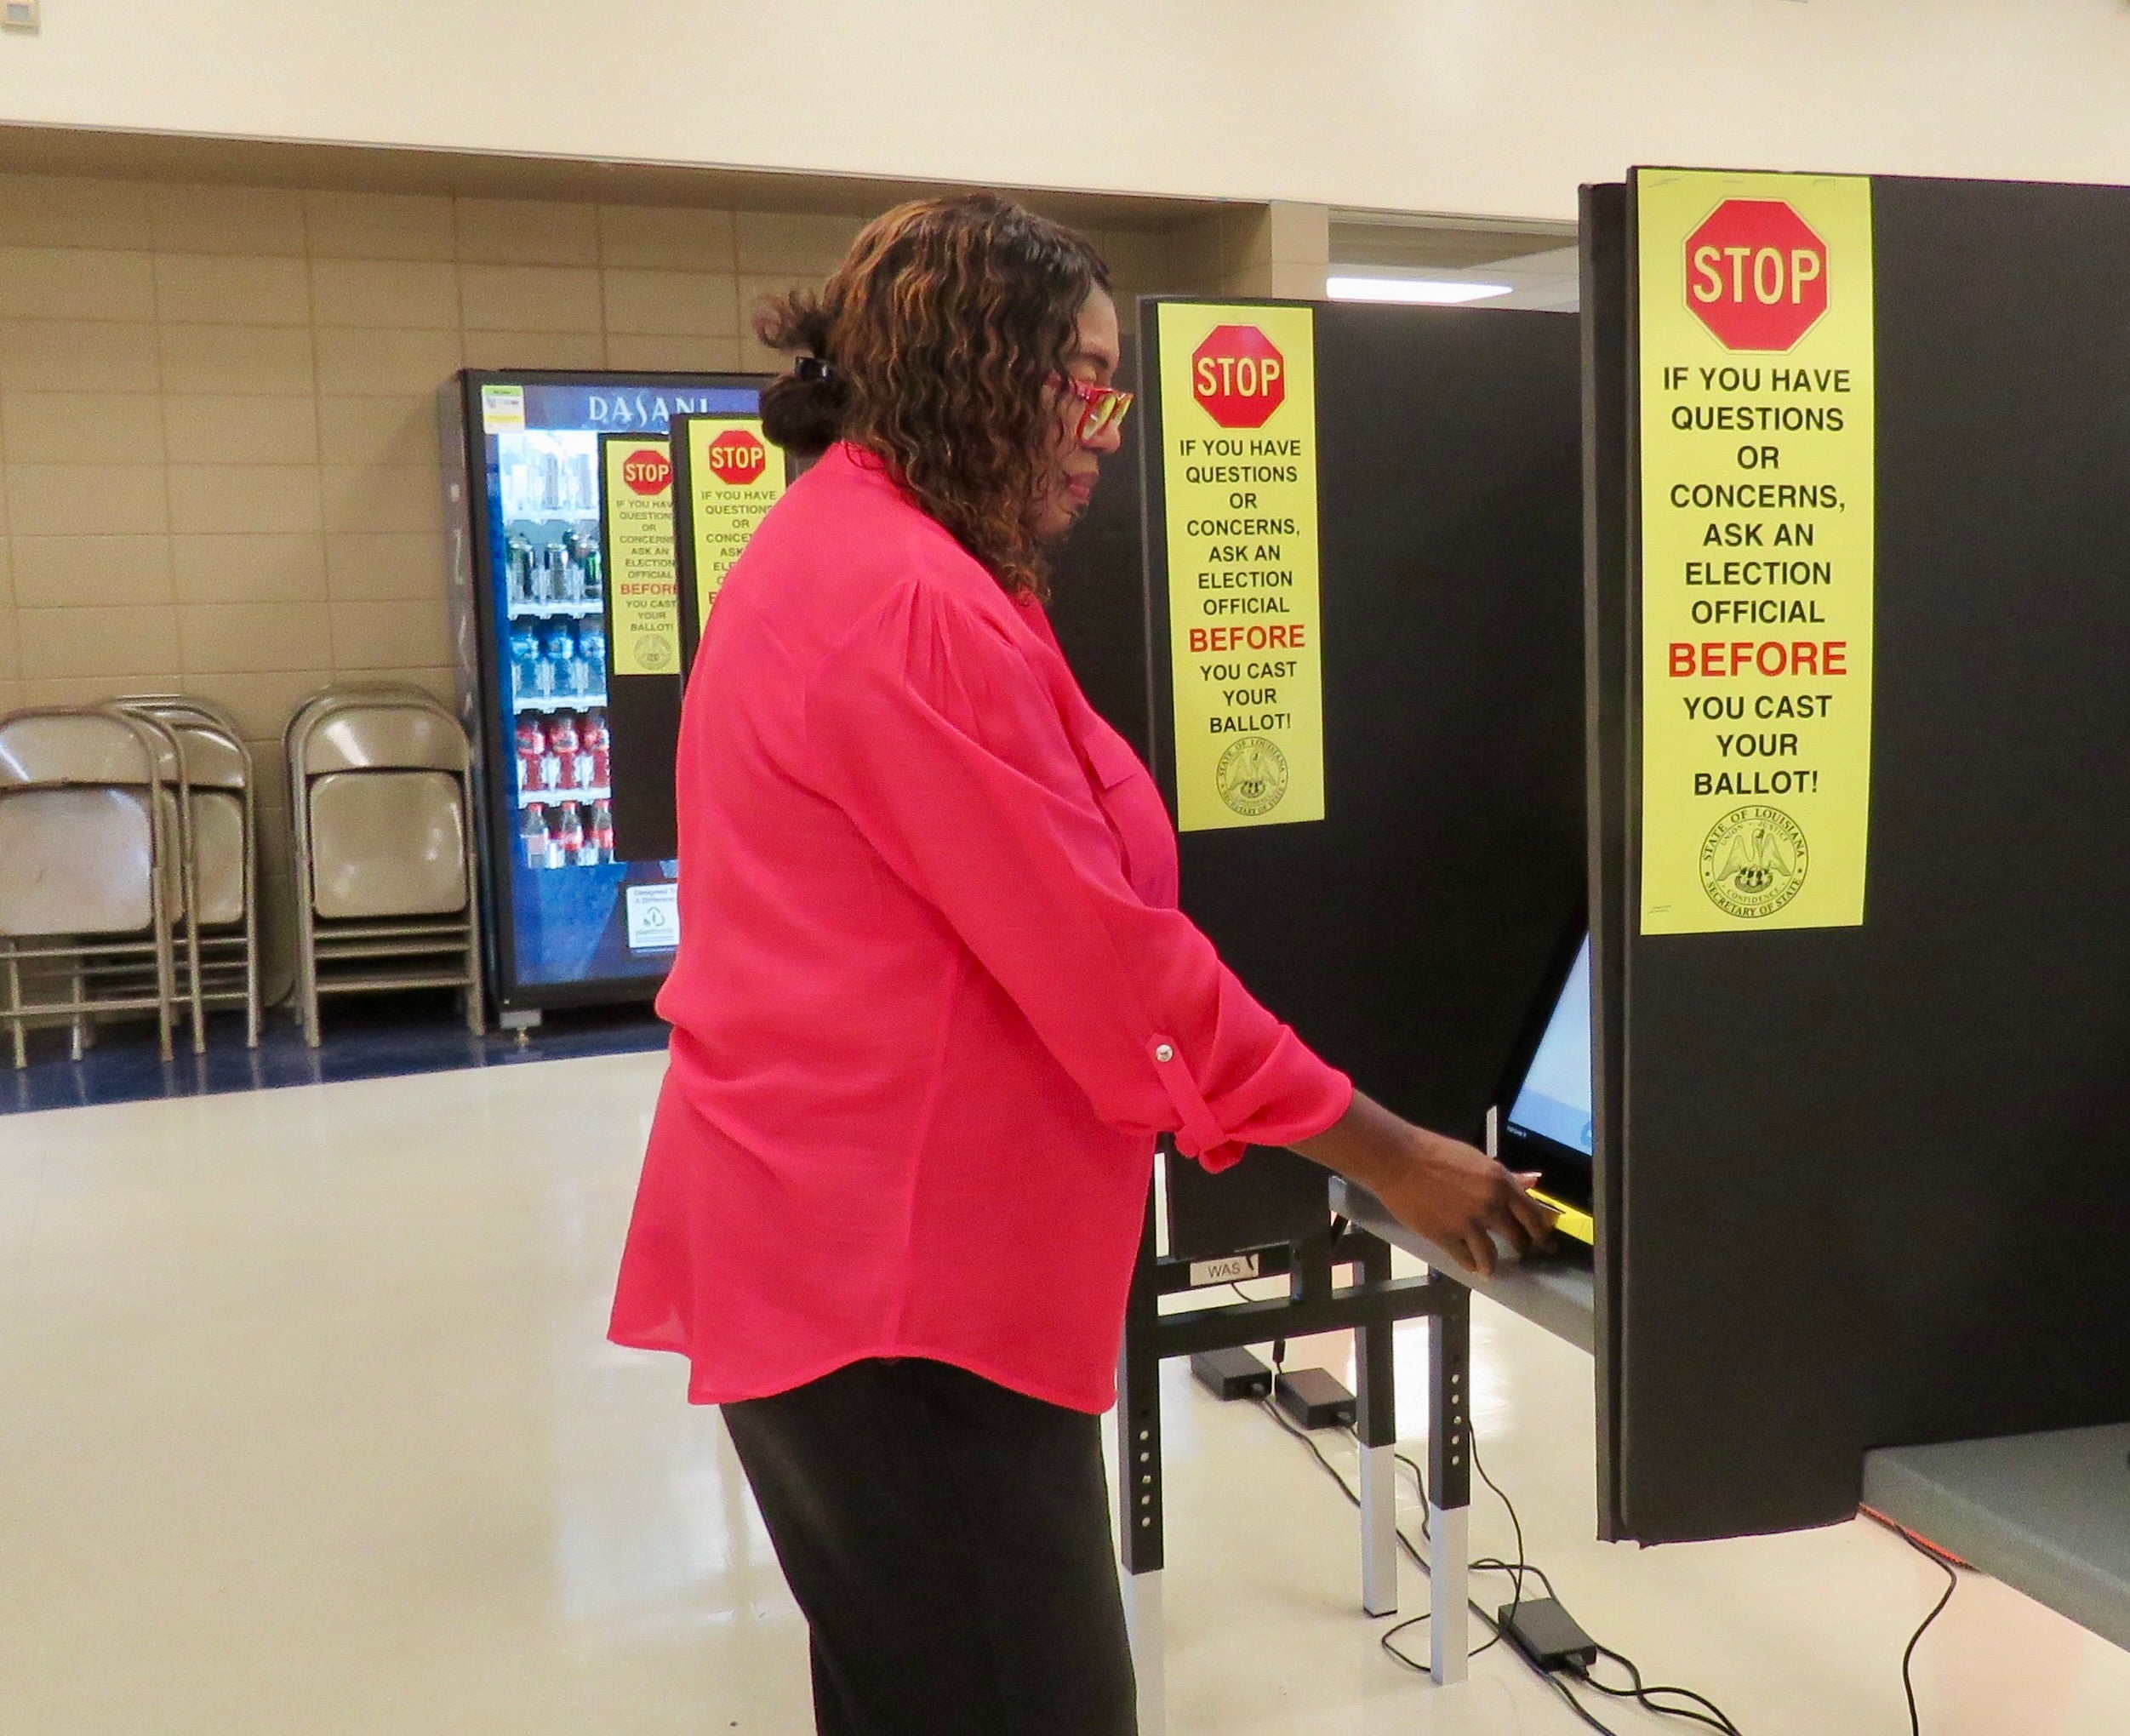 Central Fox demonstrating how to use the voting machine at Northshore Technical College.